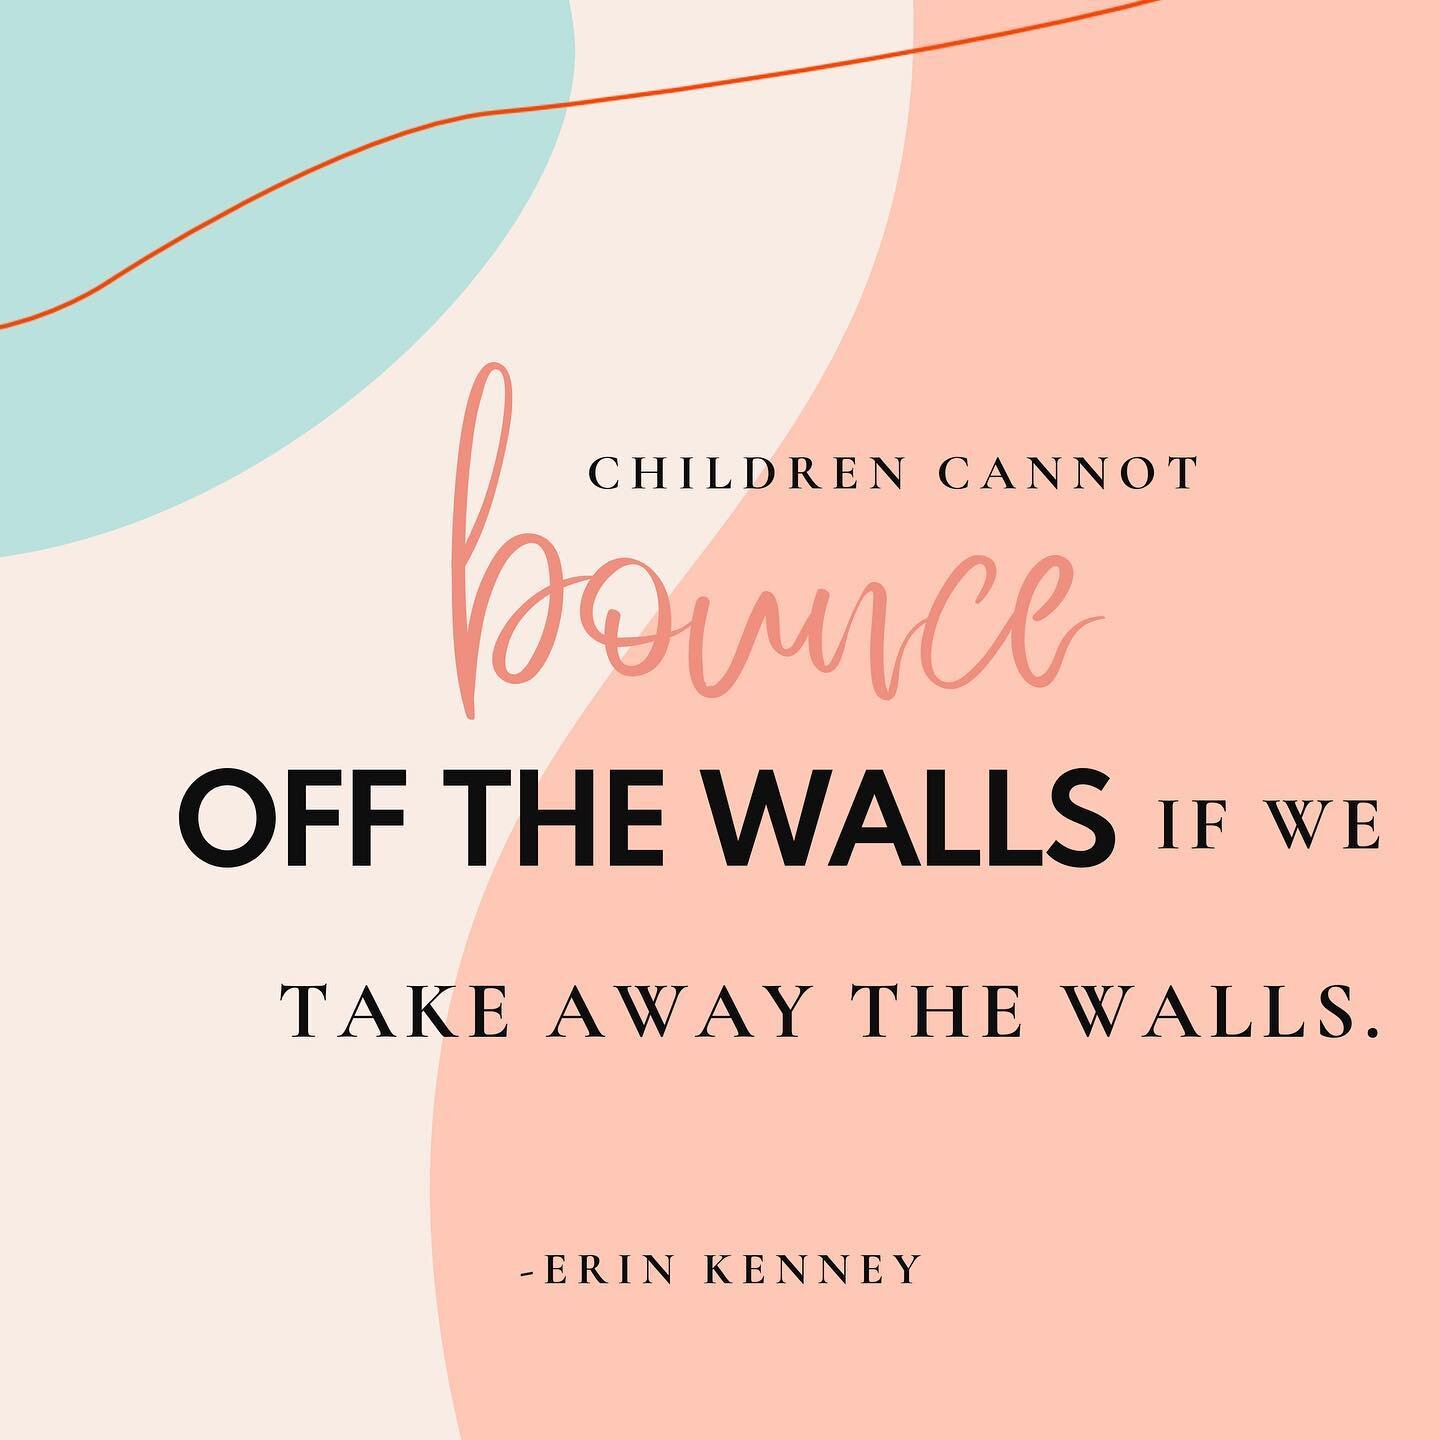 🤸&zwj;♀️ &ldquo;Children cannot bounce off the walls if we take away the walls.&rdquo; -Erin Kenney 🤾

🧗I wonder what would happen if we included more nature-based and outdoor education in our schools. 🧐

Thoughts? Ideas? Disagree? Agree? Leave a